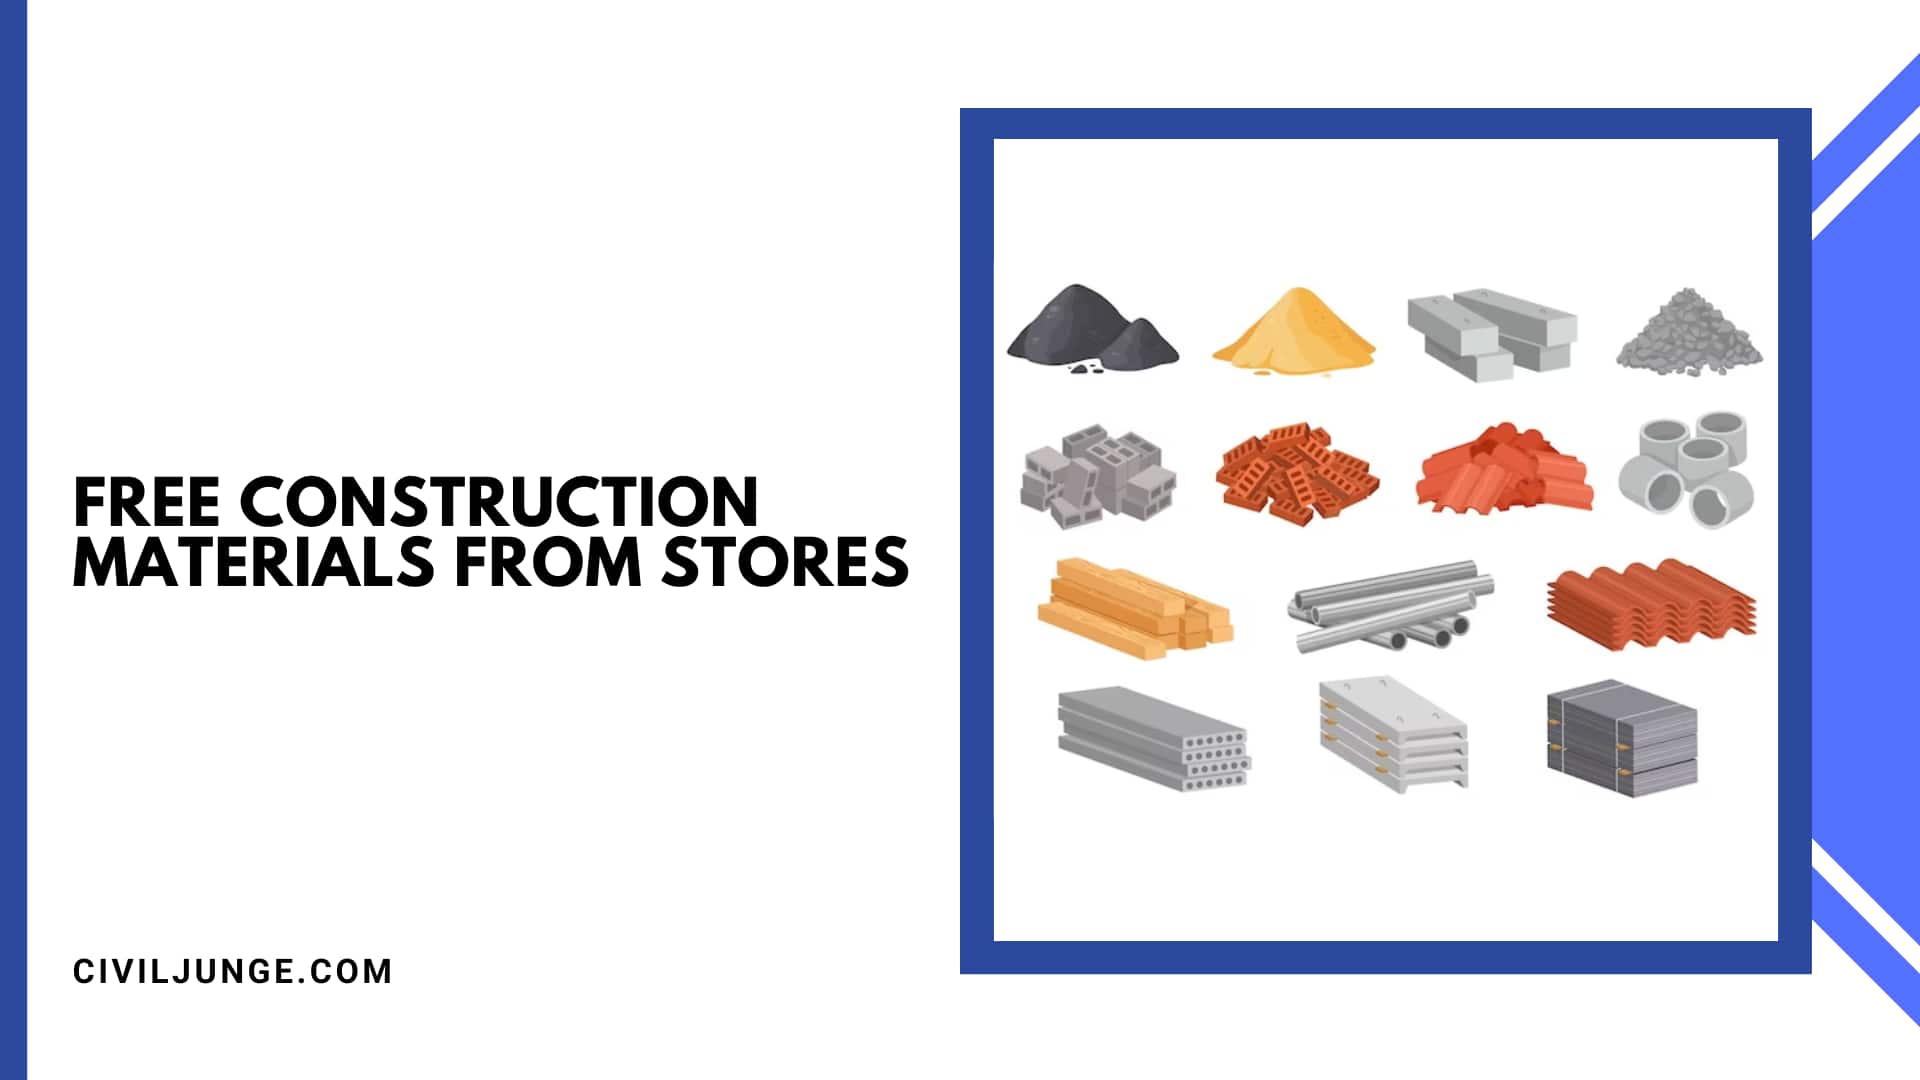 Free Construction Materials from Stores